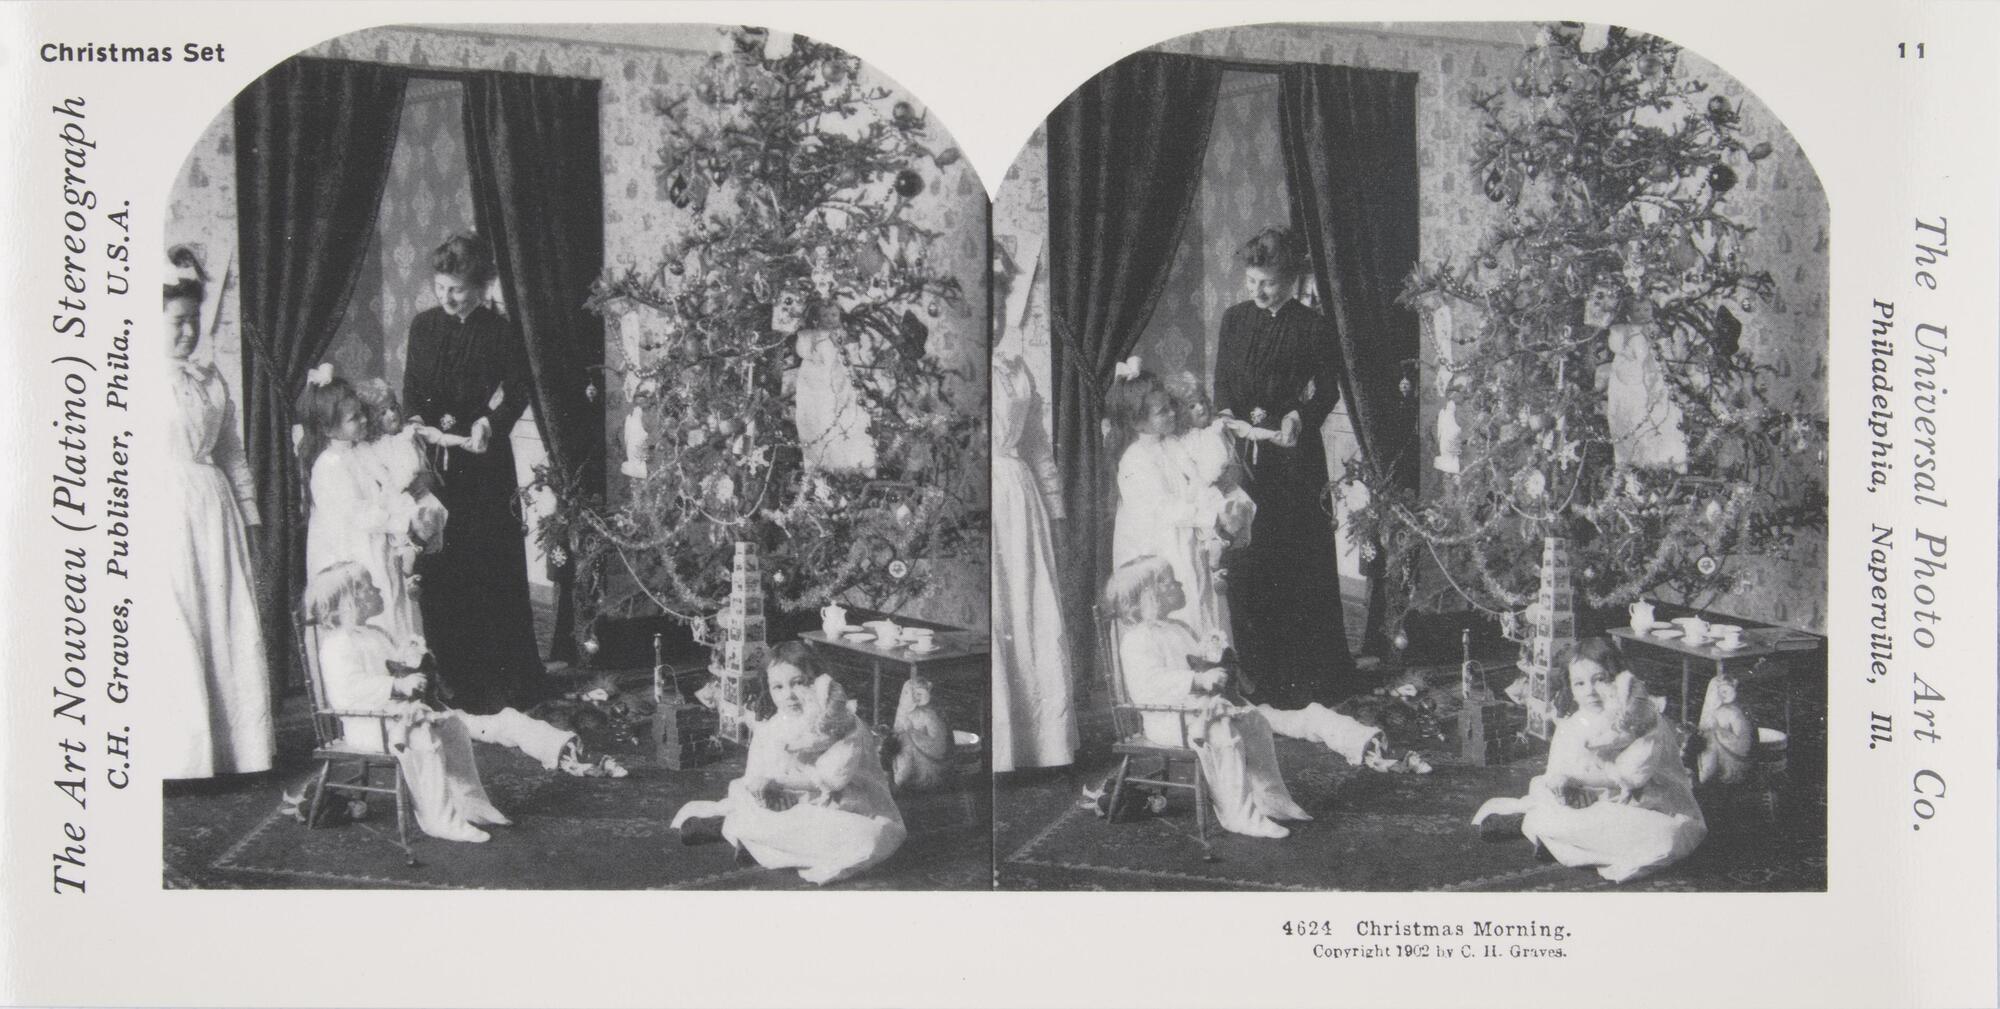 This black and white stereoscopic image features two images of four children and two women around a Christmas tree, a doorway with curtains, and toys under the tree.  It is surrounded by the text: Christmas Set; The Art Nouveau (Platino) Stereograph; The Universal Photo Art Co., 4624 Christmas Morning, Copyright 1902 by C.H. Graves.<br />